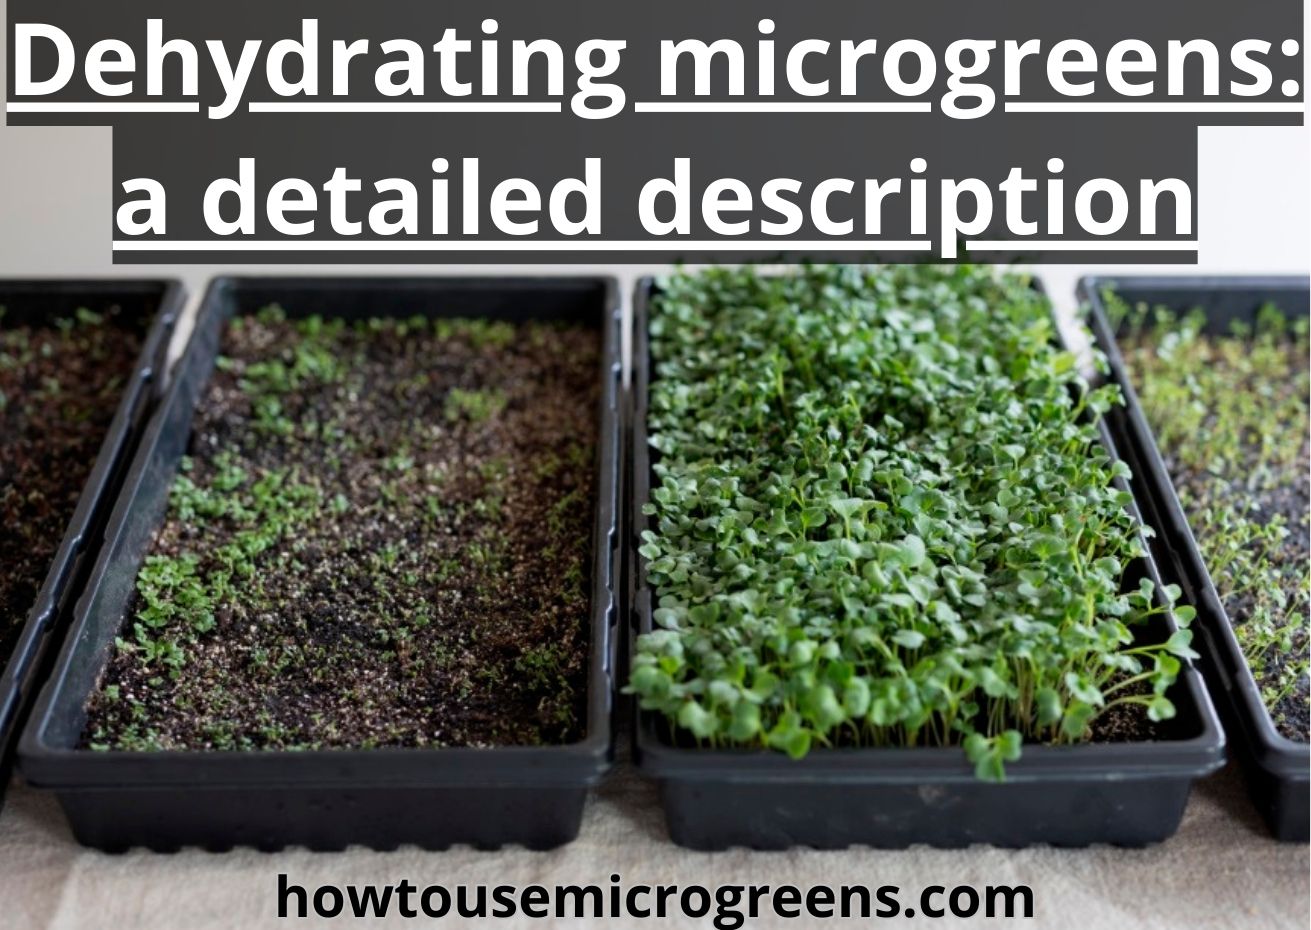 Dehydrating microgreens: main techniques and 8 basic tips